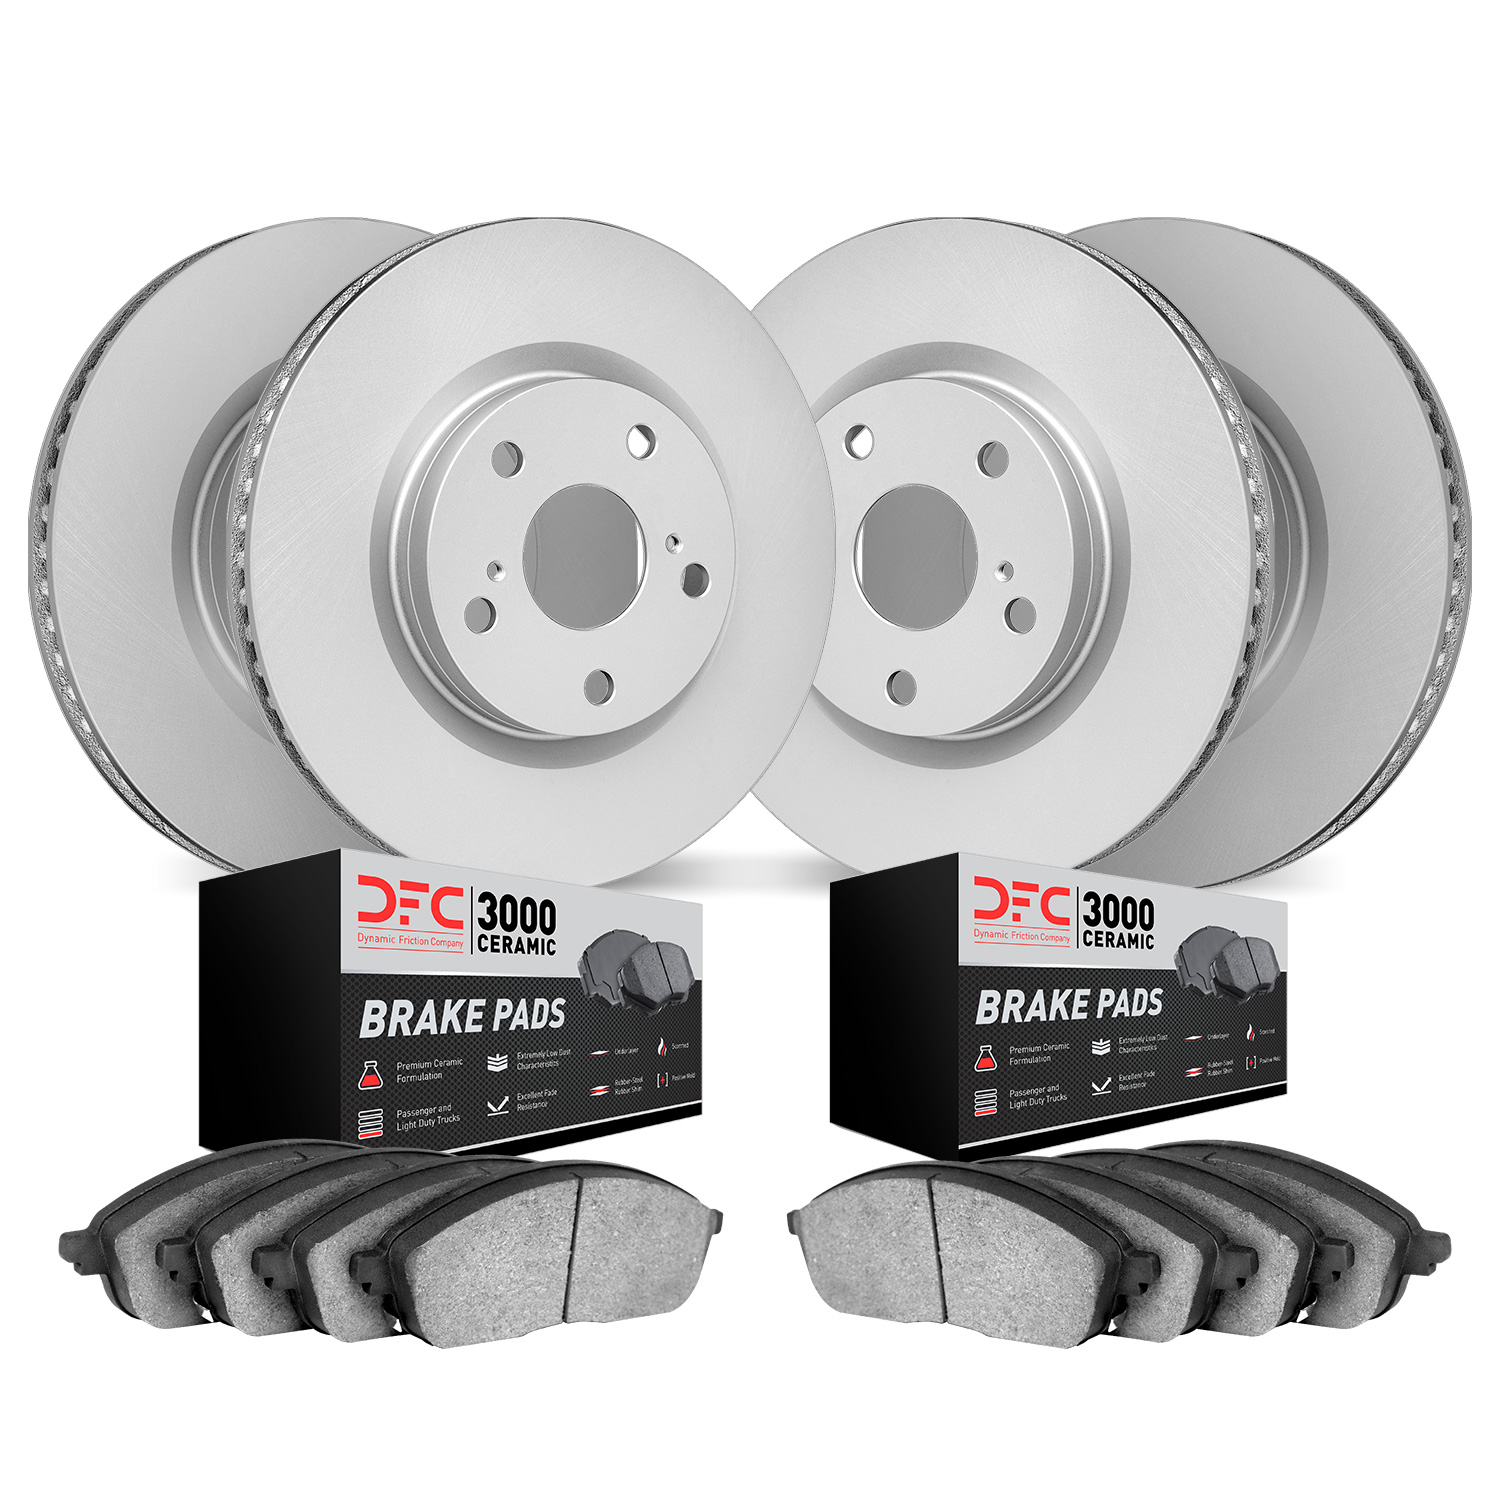 4304-31068 Geospec Brake Rotors with 3000-Series Ceramic Brake Pads Kit, 2012-2020 BMW, Position: Front and Rear